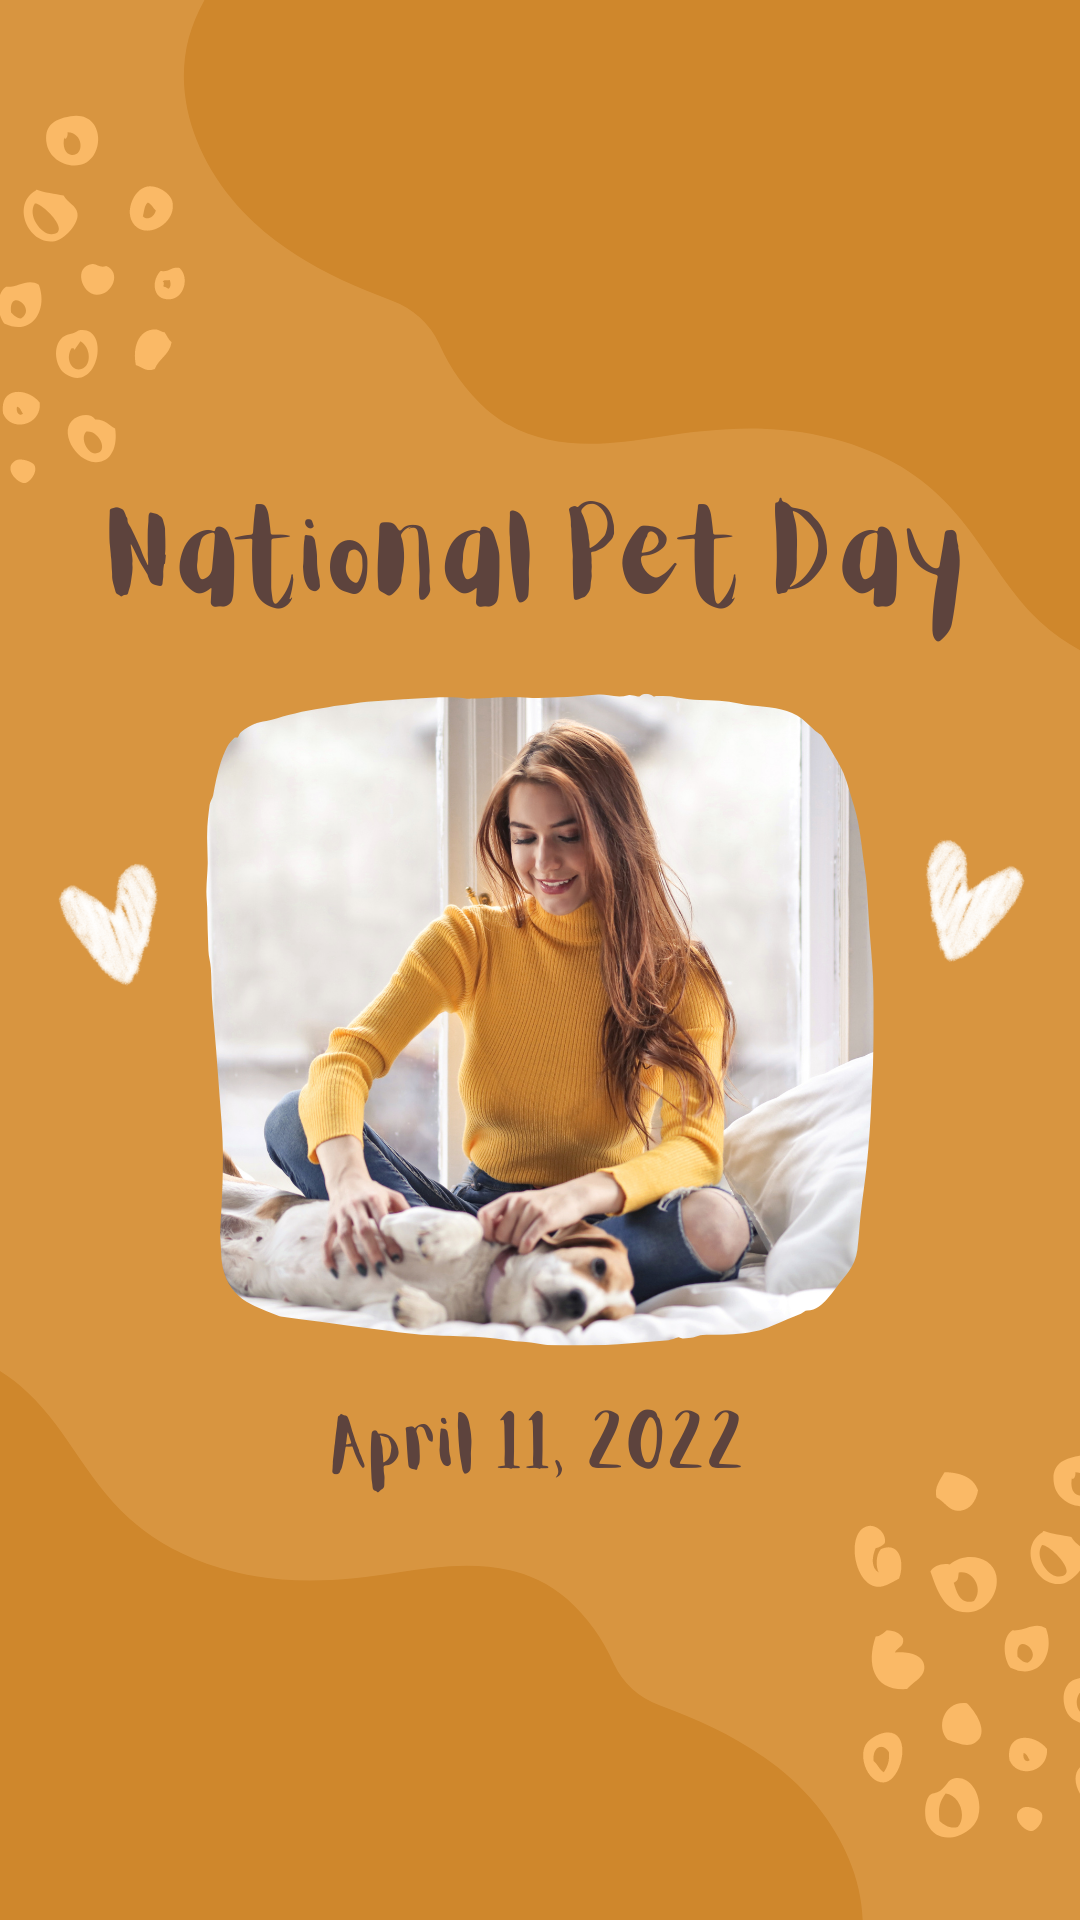 appy national pet day wishes & images for instagram story